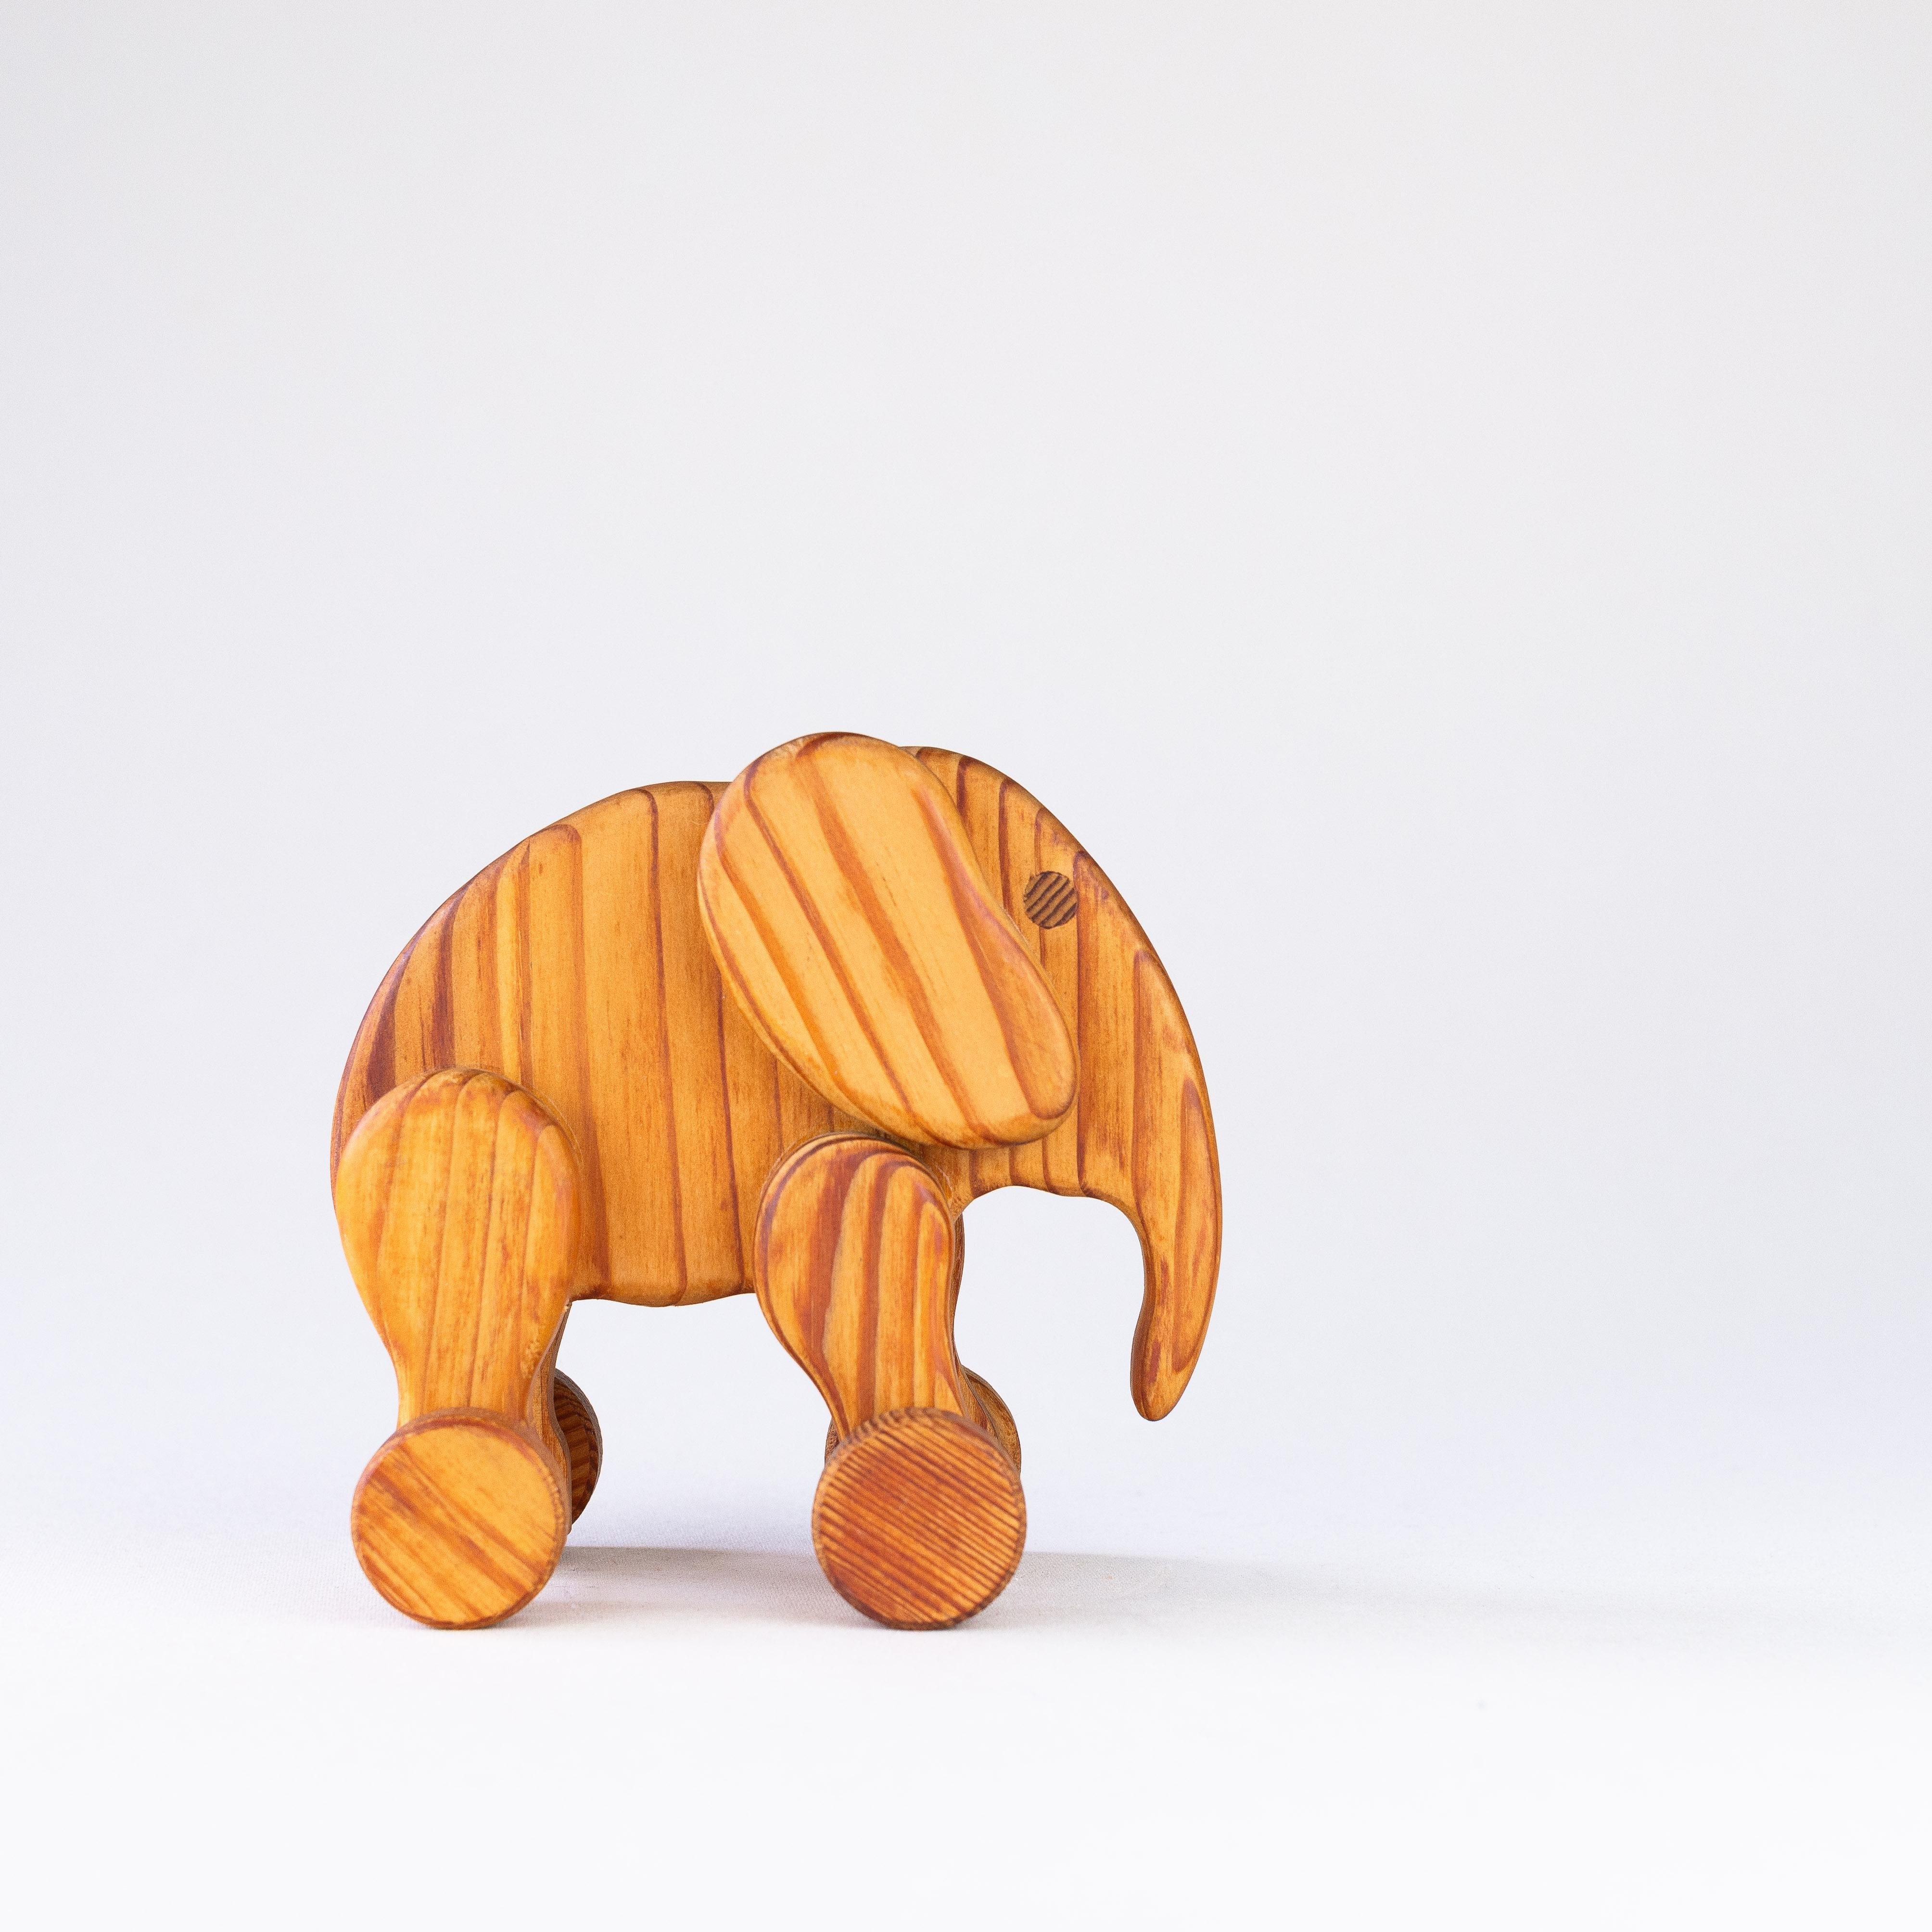 Wood Elephant on wheels from the 1960s.

Superb collector's item, with a very sleek and minimal design.

This piece made of pine displays a beautiful woodwork, taking advantage of the wood grain cut in different directions : on the wheels, the body,